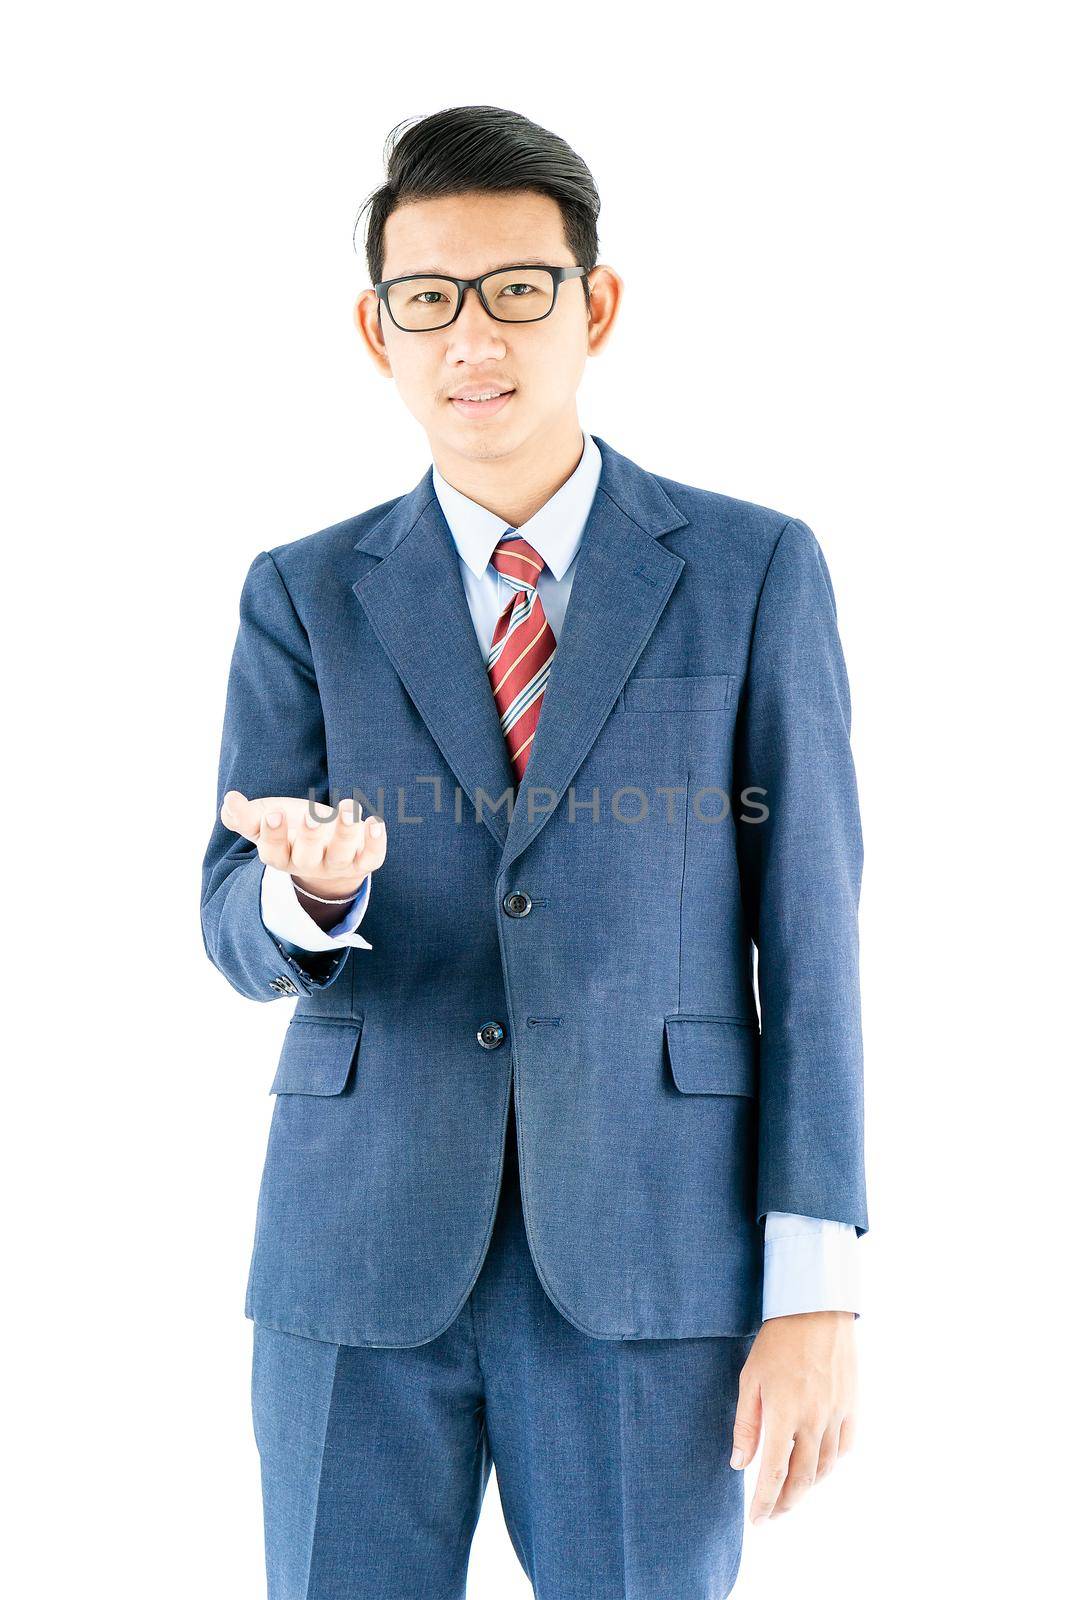 Young asian businessman portrait in suit and wear glasses over white background